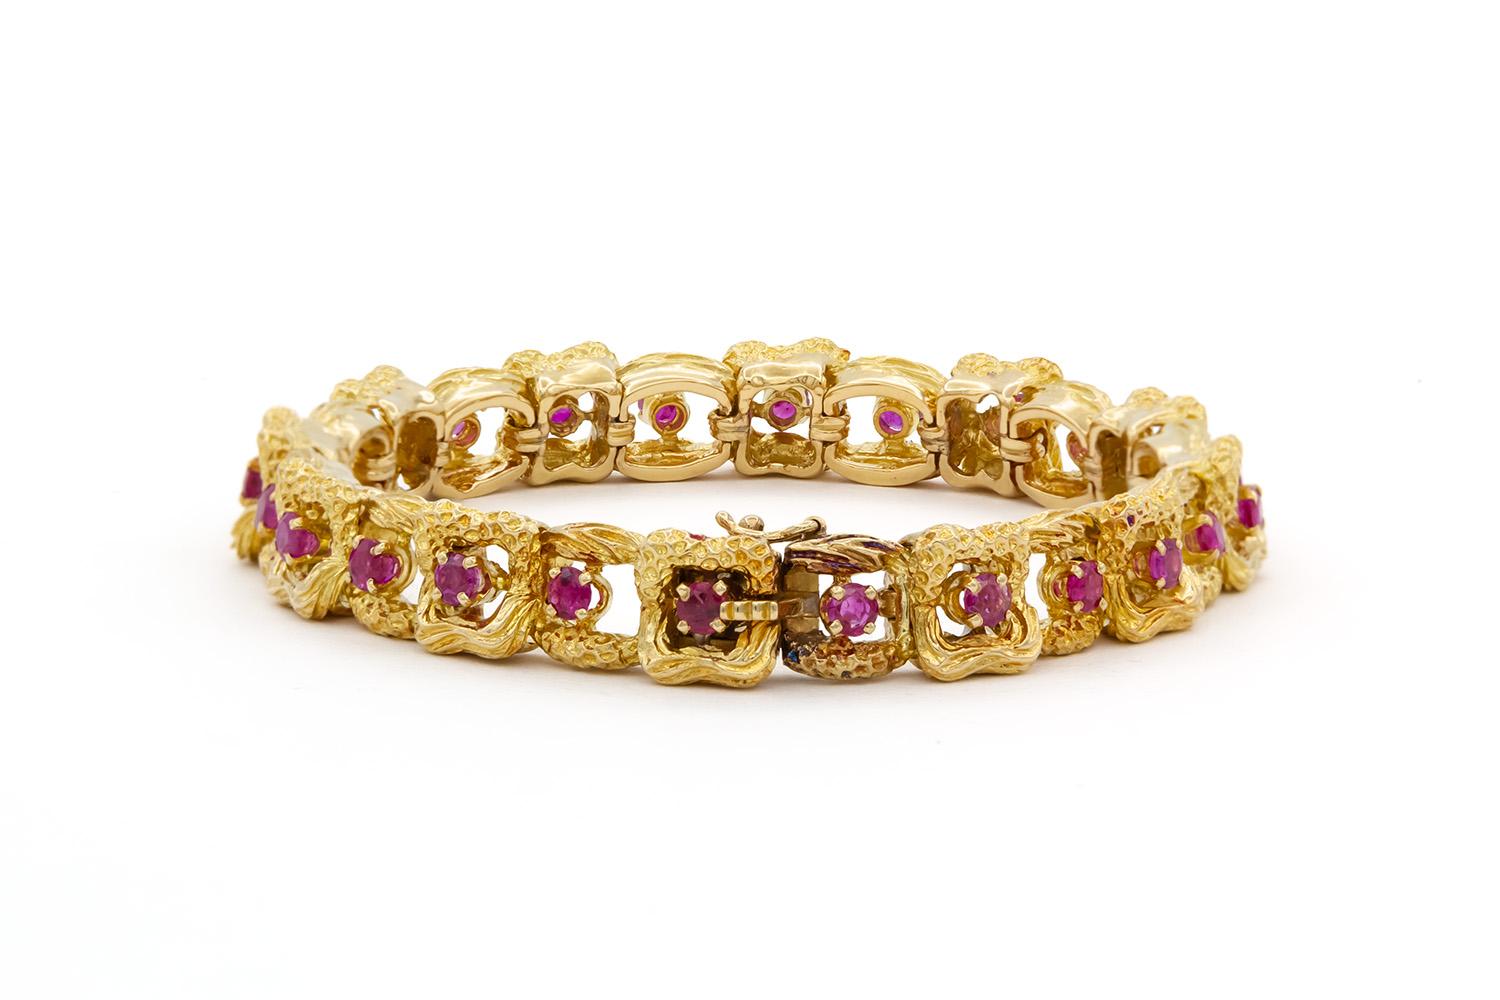 Contemporary Vintage Tiffany & Co. 18k Yellow Gold & Ruby Link Bracelet